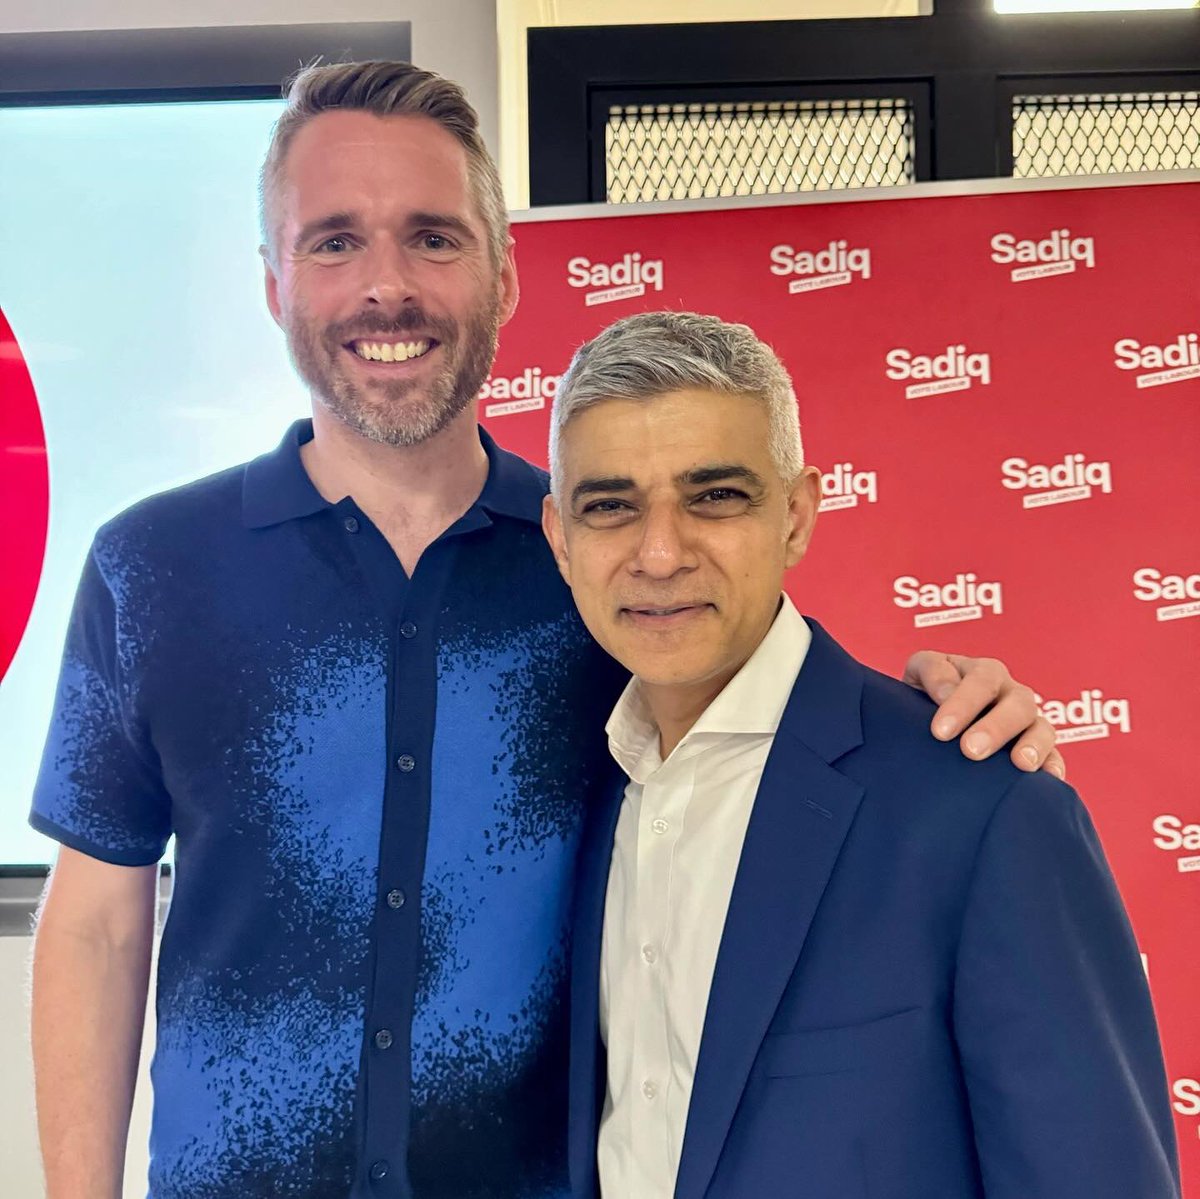 Congratulations @SadiqKhan on winning an historic third term as @MayorofLondon. A huge result and a strong mandate to deliver his manifesto including: 🌹 40k new council homes 🌹 6k new rent control homes 🌹 Ending rough sleeping by 2030 🌹 New Mayoral Development Corporations